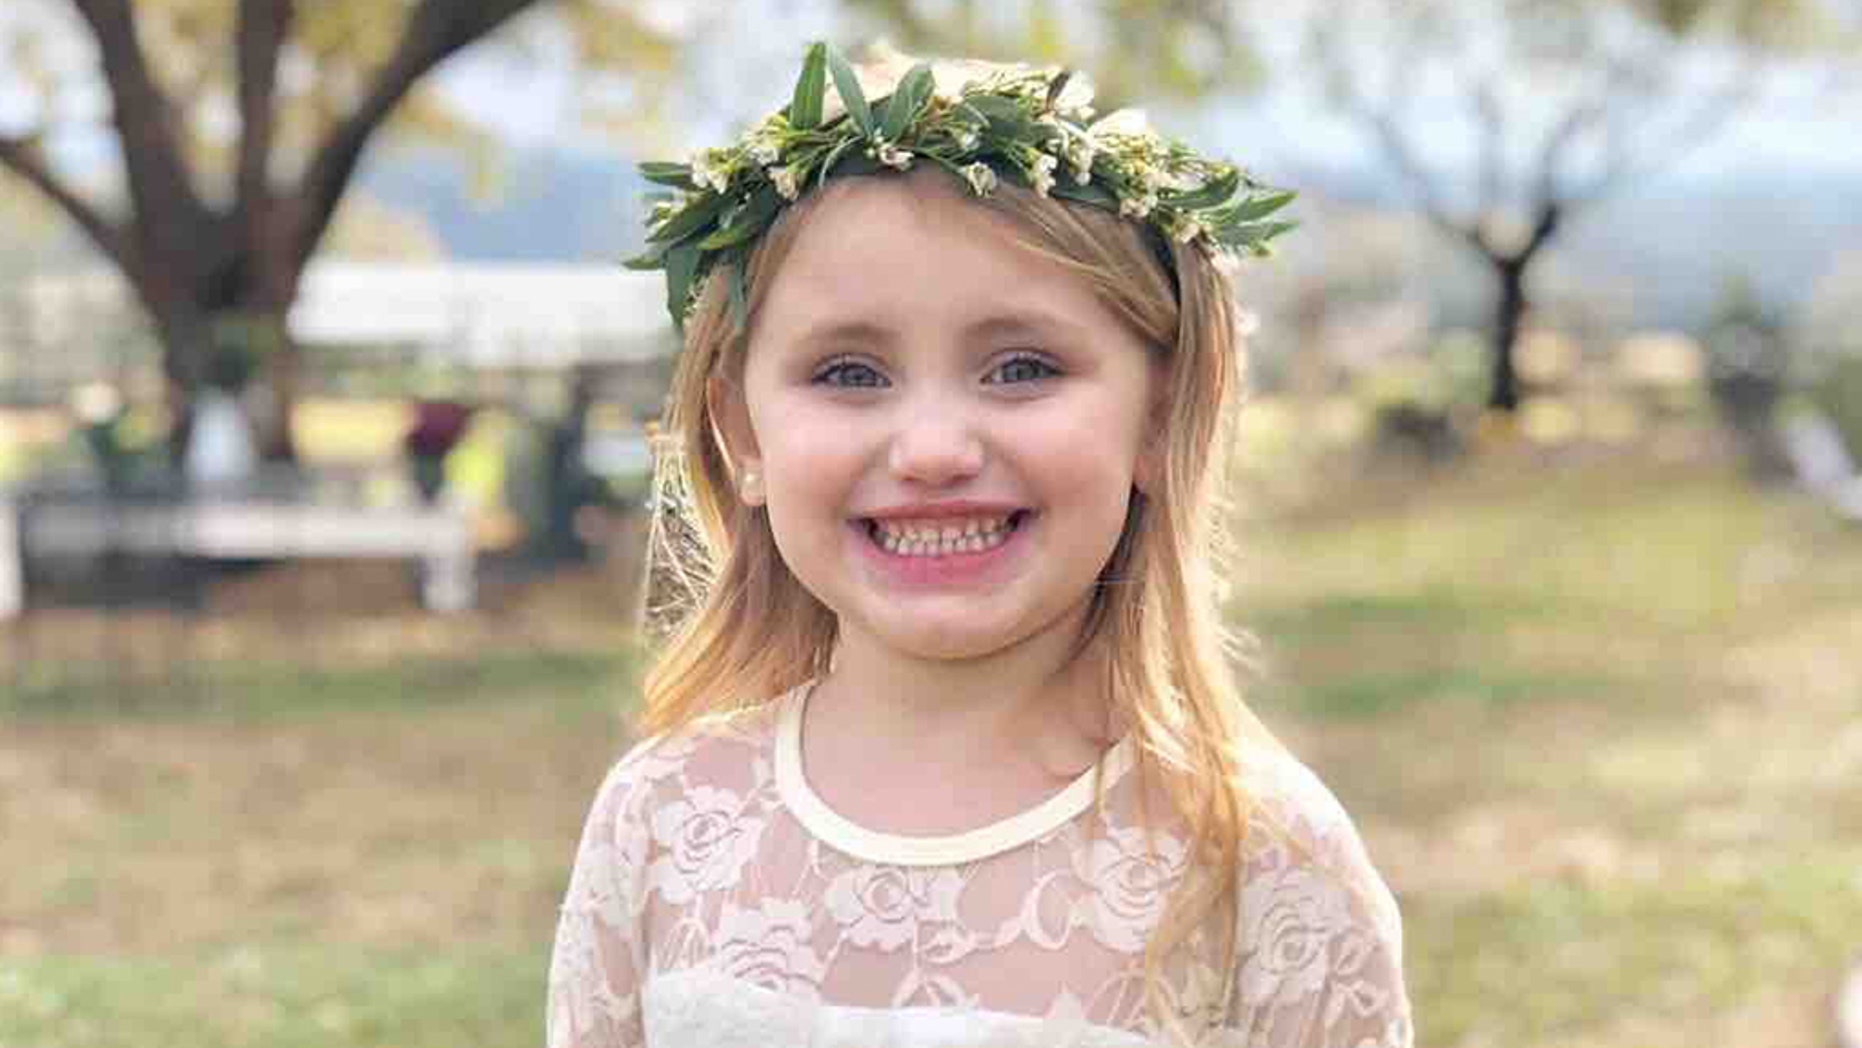 Thousand-year-old Drew Kelly, 6, died after being shot by her brother. (GoFundMe)